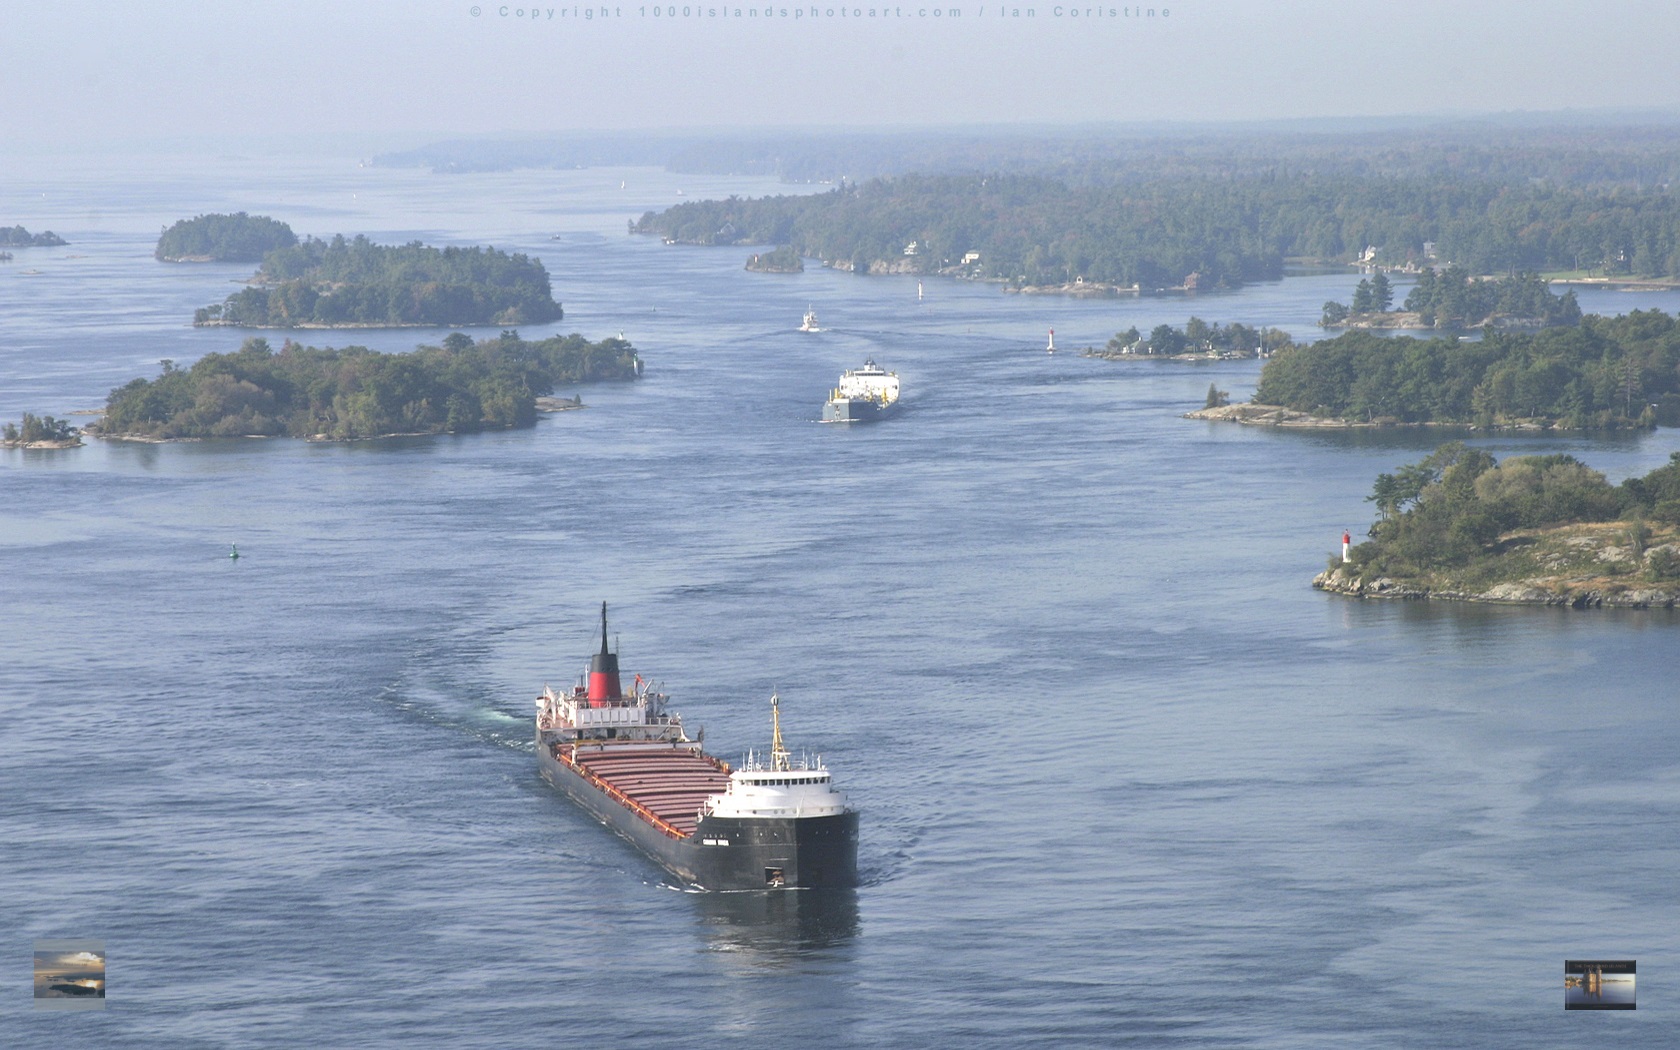 October 7, 2006:  The stretch of the St Lawrence River just east of Lake Ontario is known as the Thousand Islands region for fairly obvious reasons.  Lots and lots of islands...